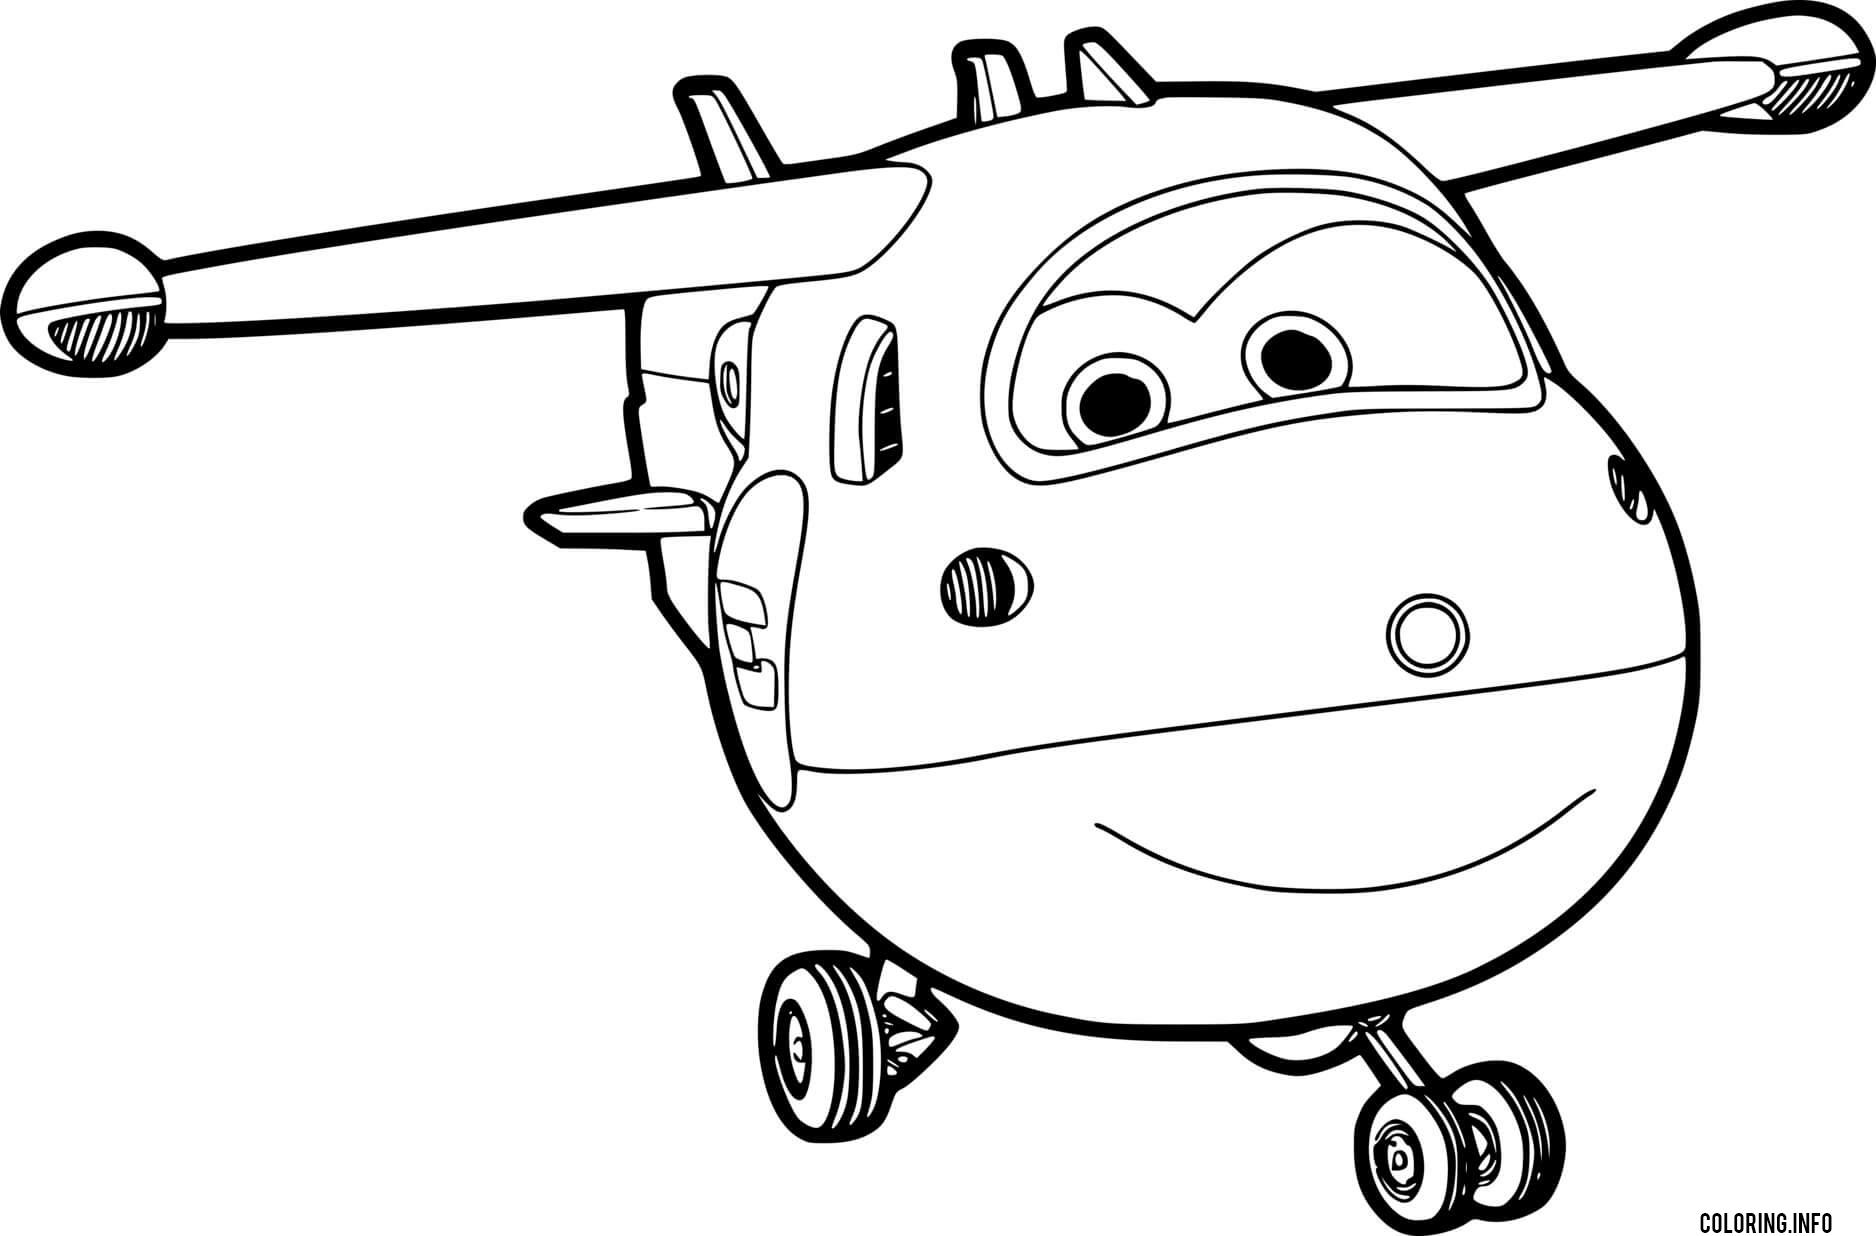 Airplane Jett From Super Wings coloring